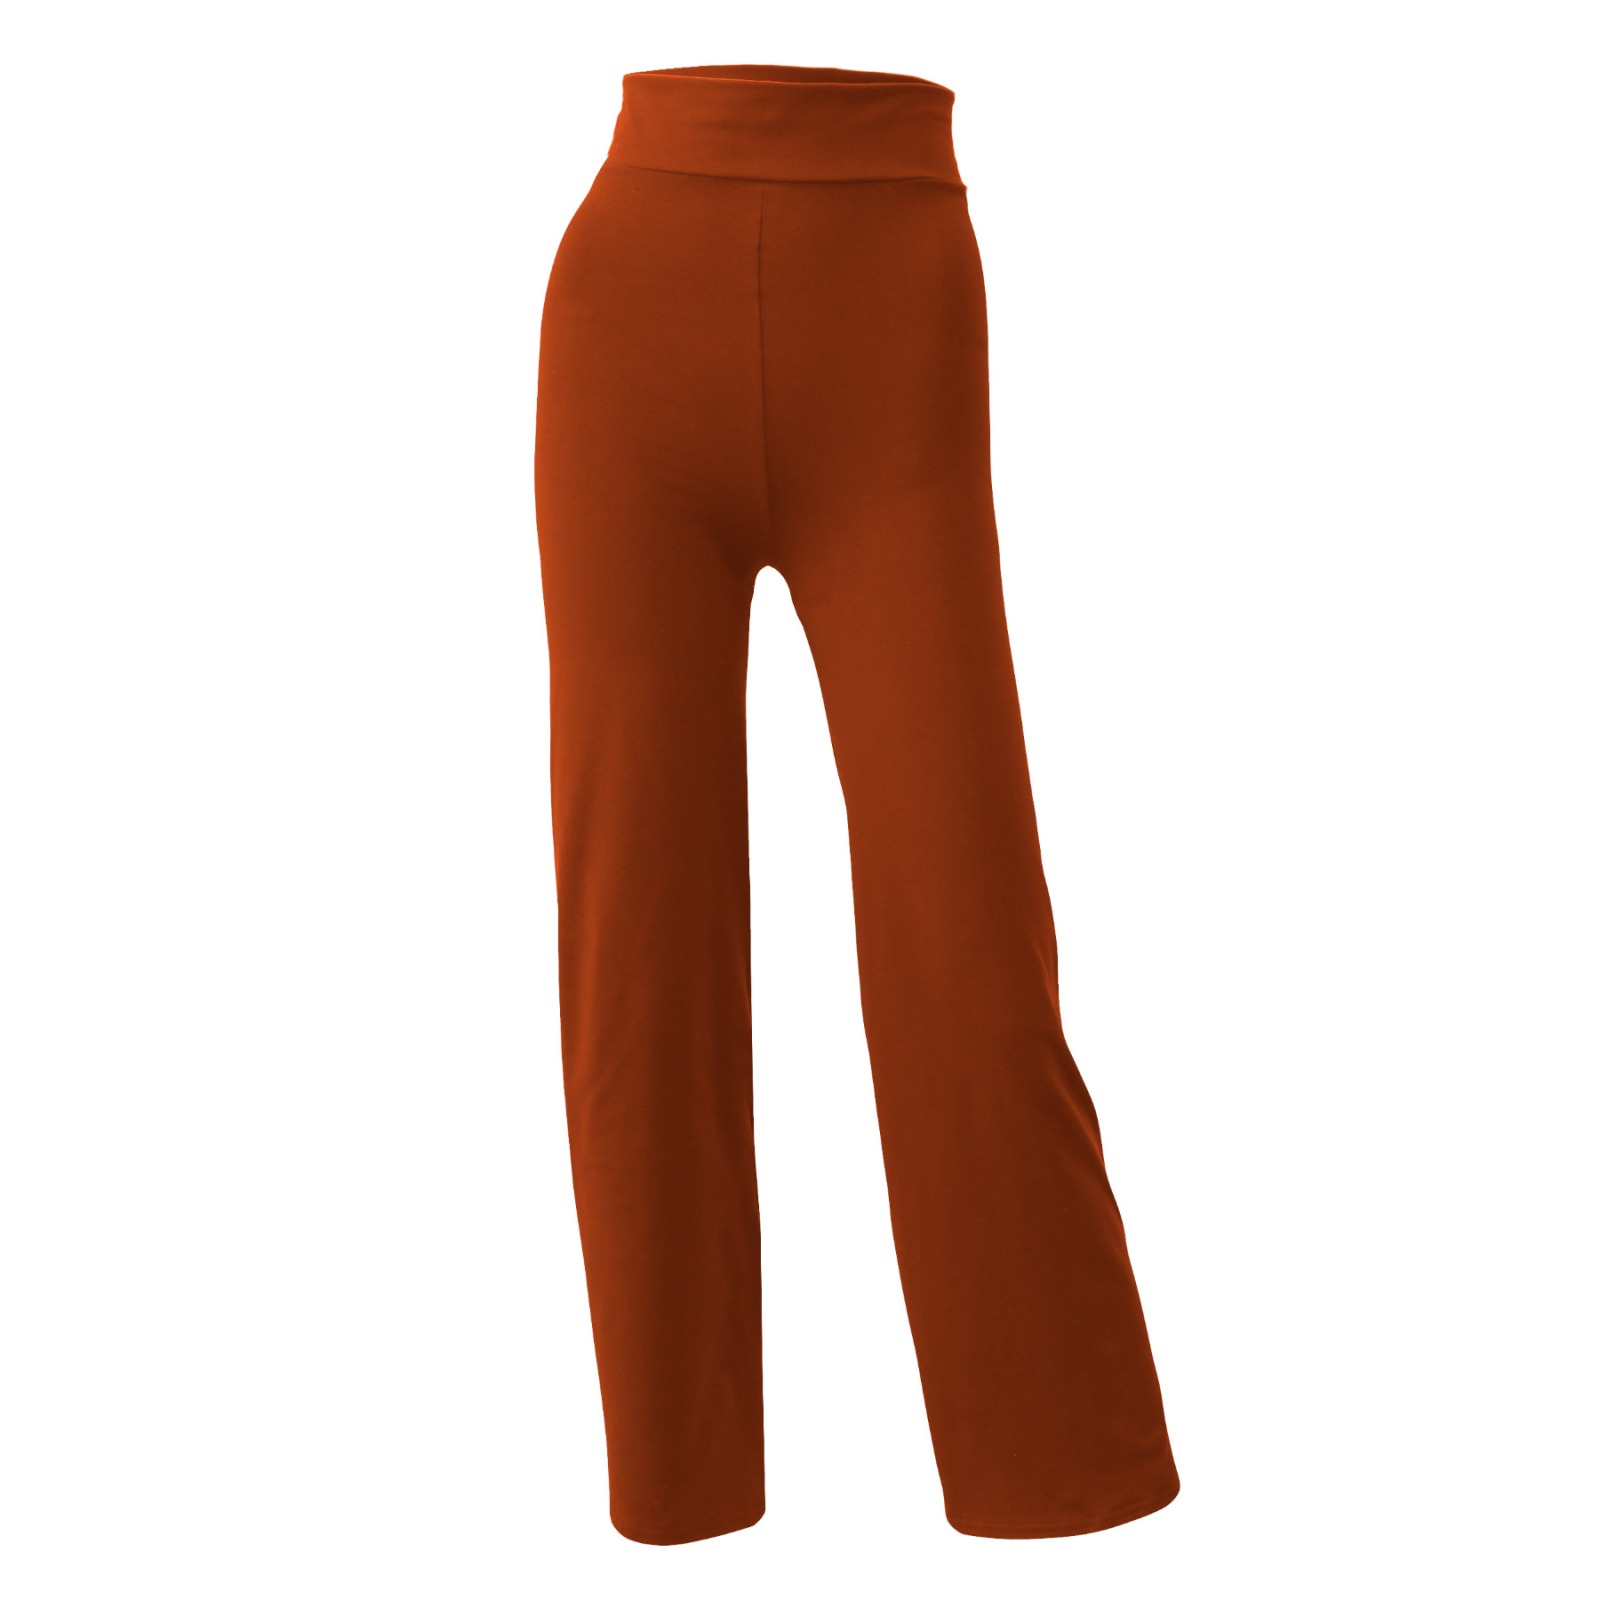 Yoga pants Relaxed Fit rust orange